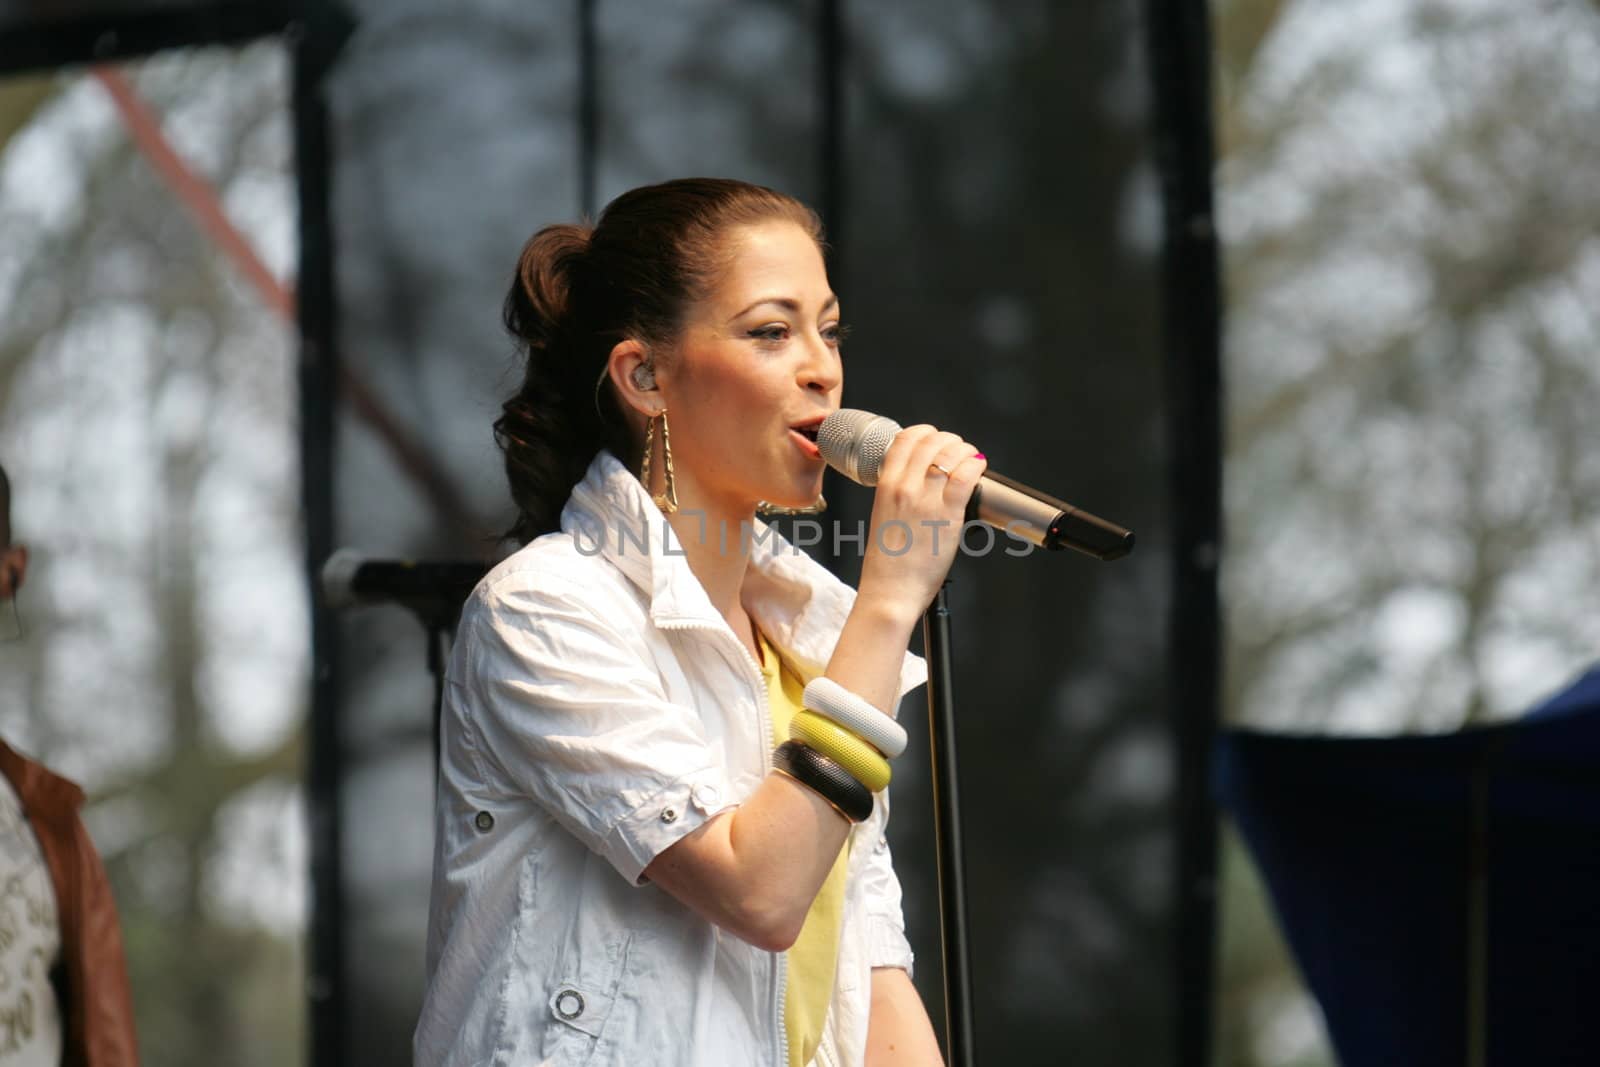 Natalia Kukulska (born March 3, 1976 in Warsaw, Poland) is a singer, former child singer and former child actress in her native Poland. Natalia is the daughter of the late Polish composer Jarosław Kukulski and the late Polish vocalist, Anna Jantar.